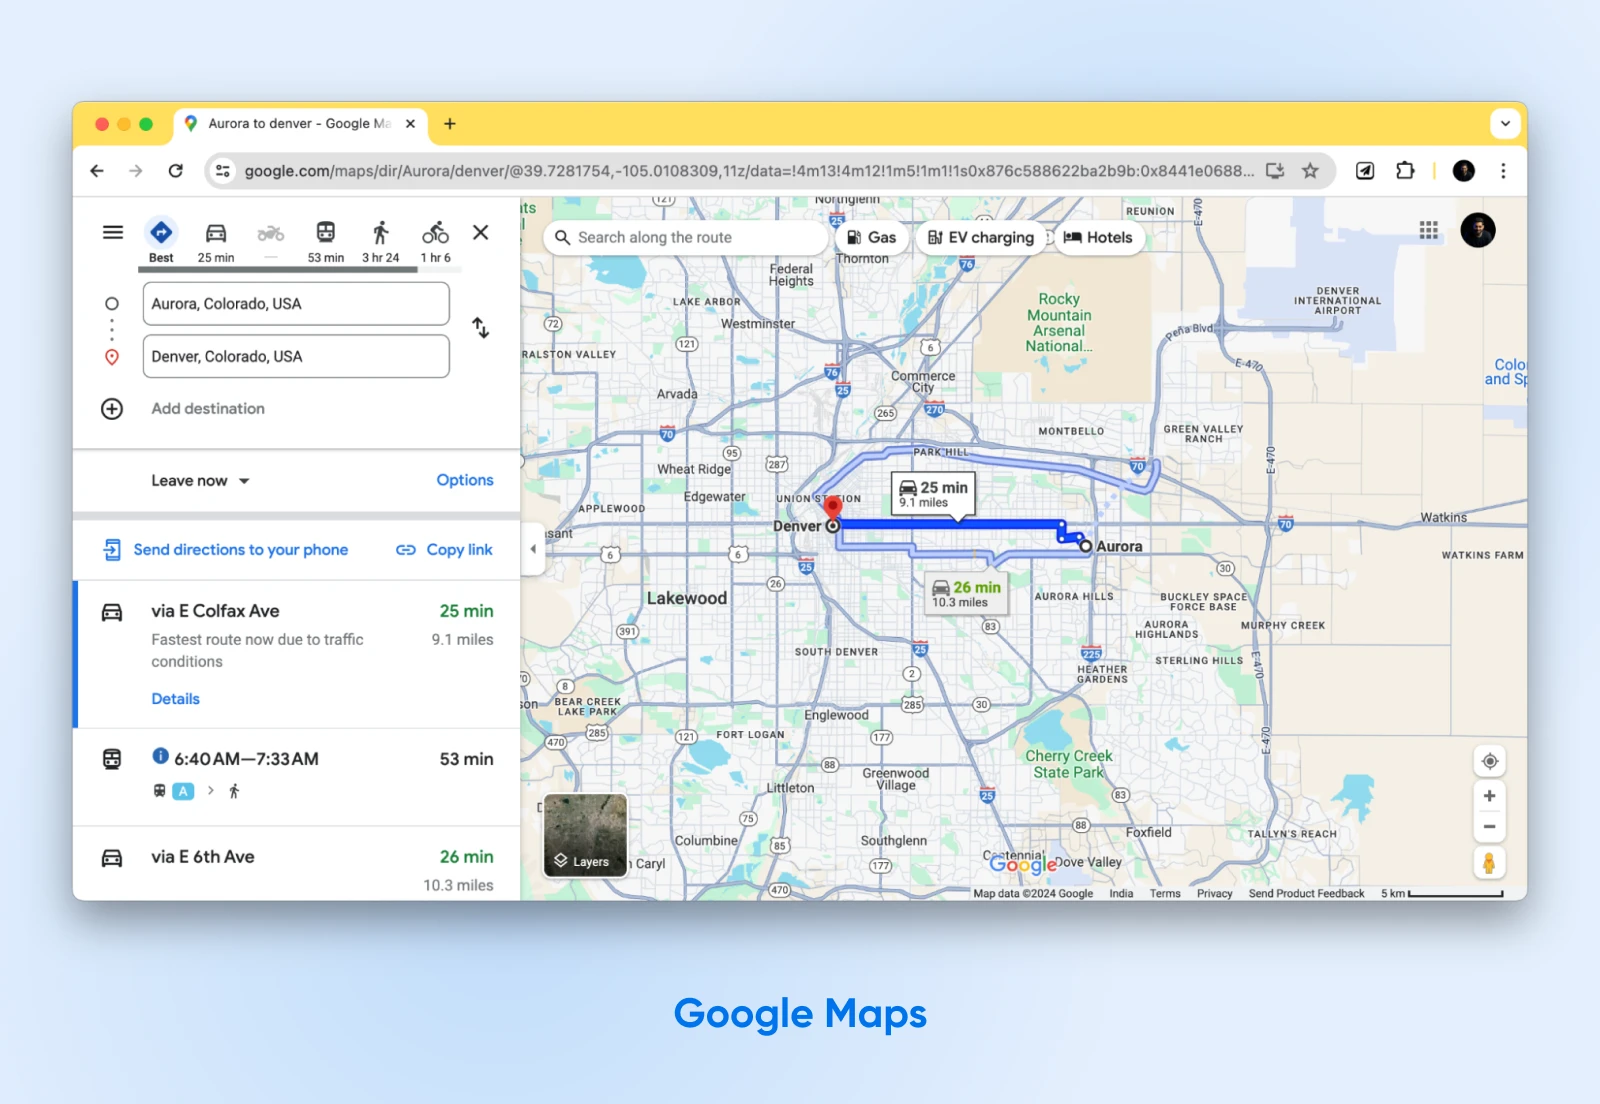 Google Maps' detailed features on display for a selected route showing the distance, red pin, and destination.